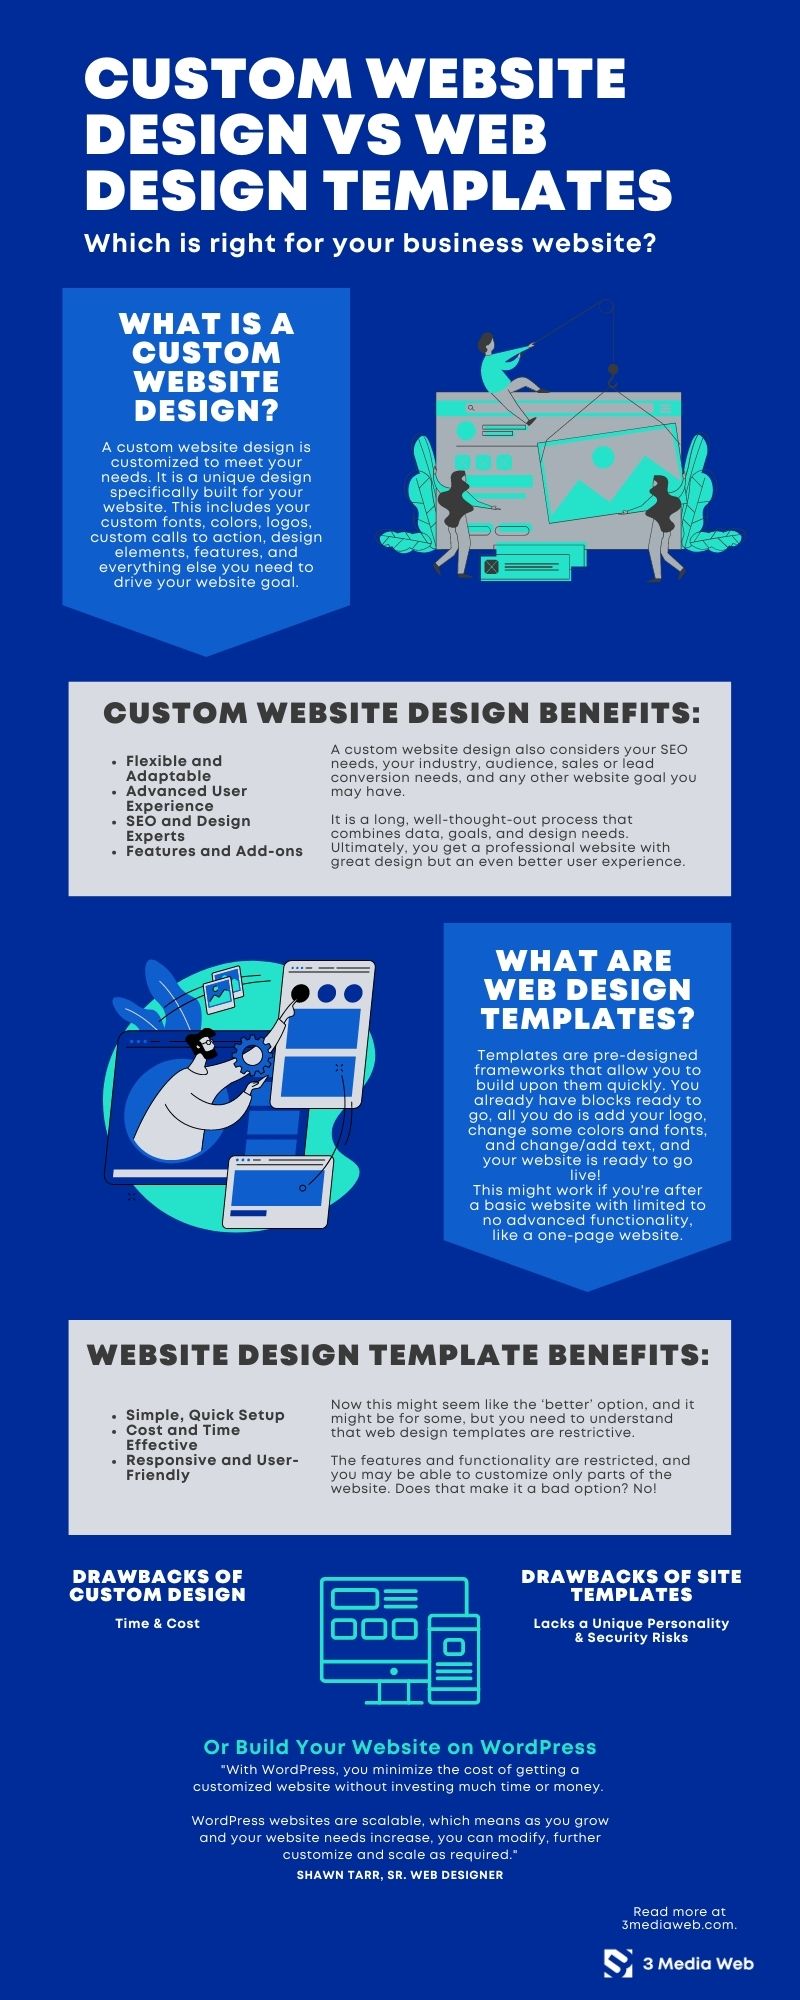 Custom Website Design Vs Web Design Templates, which one is right for your business? 